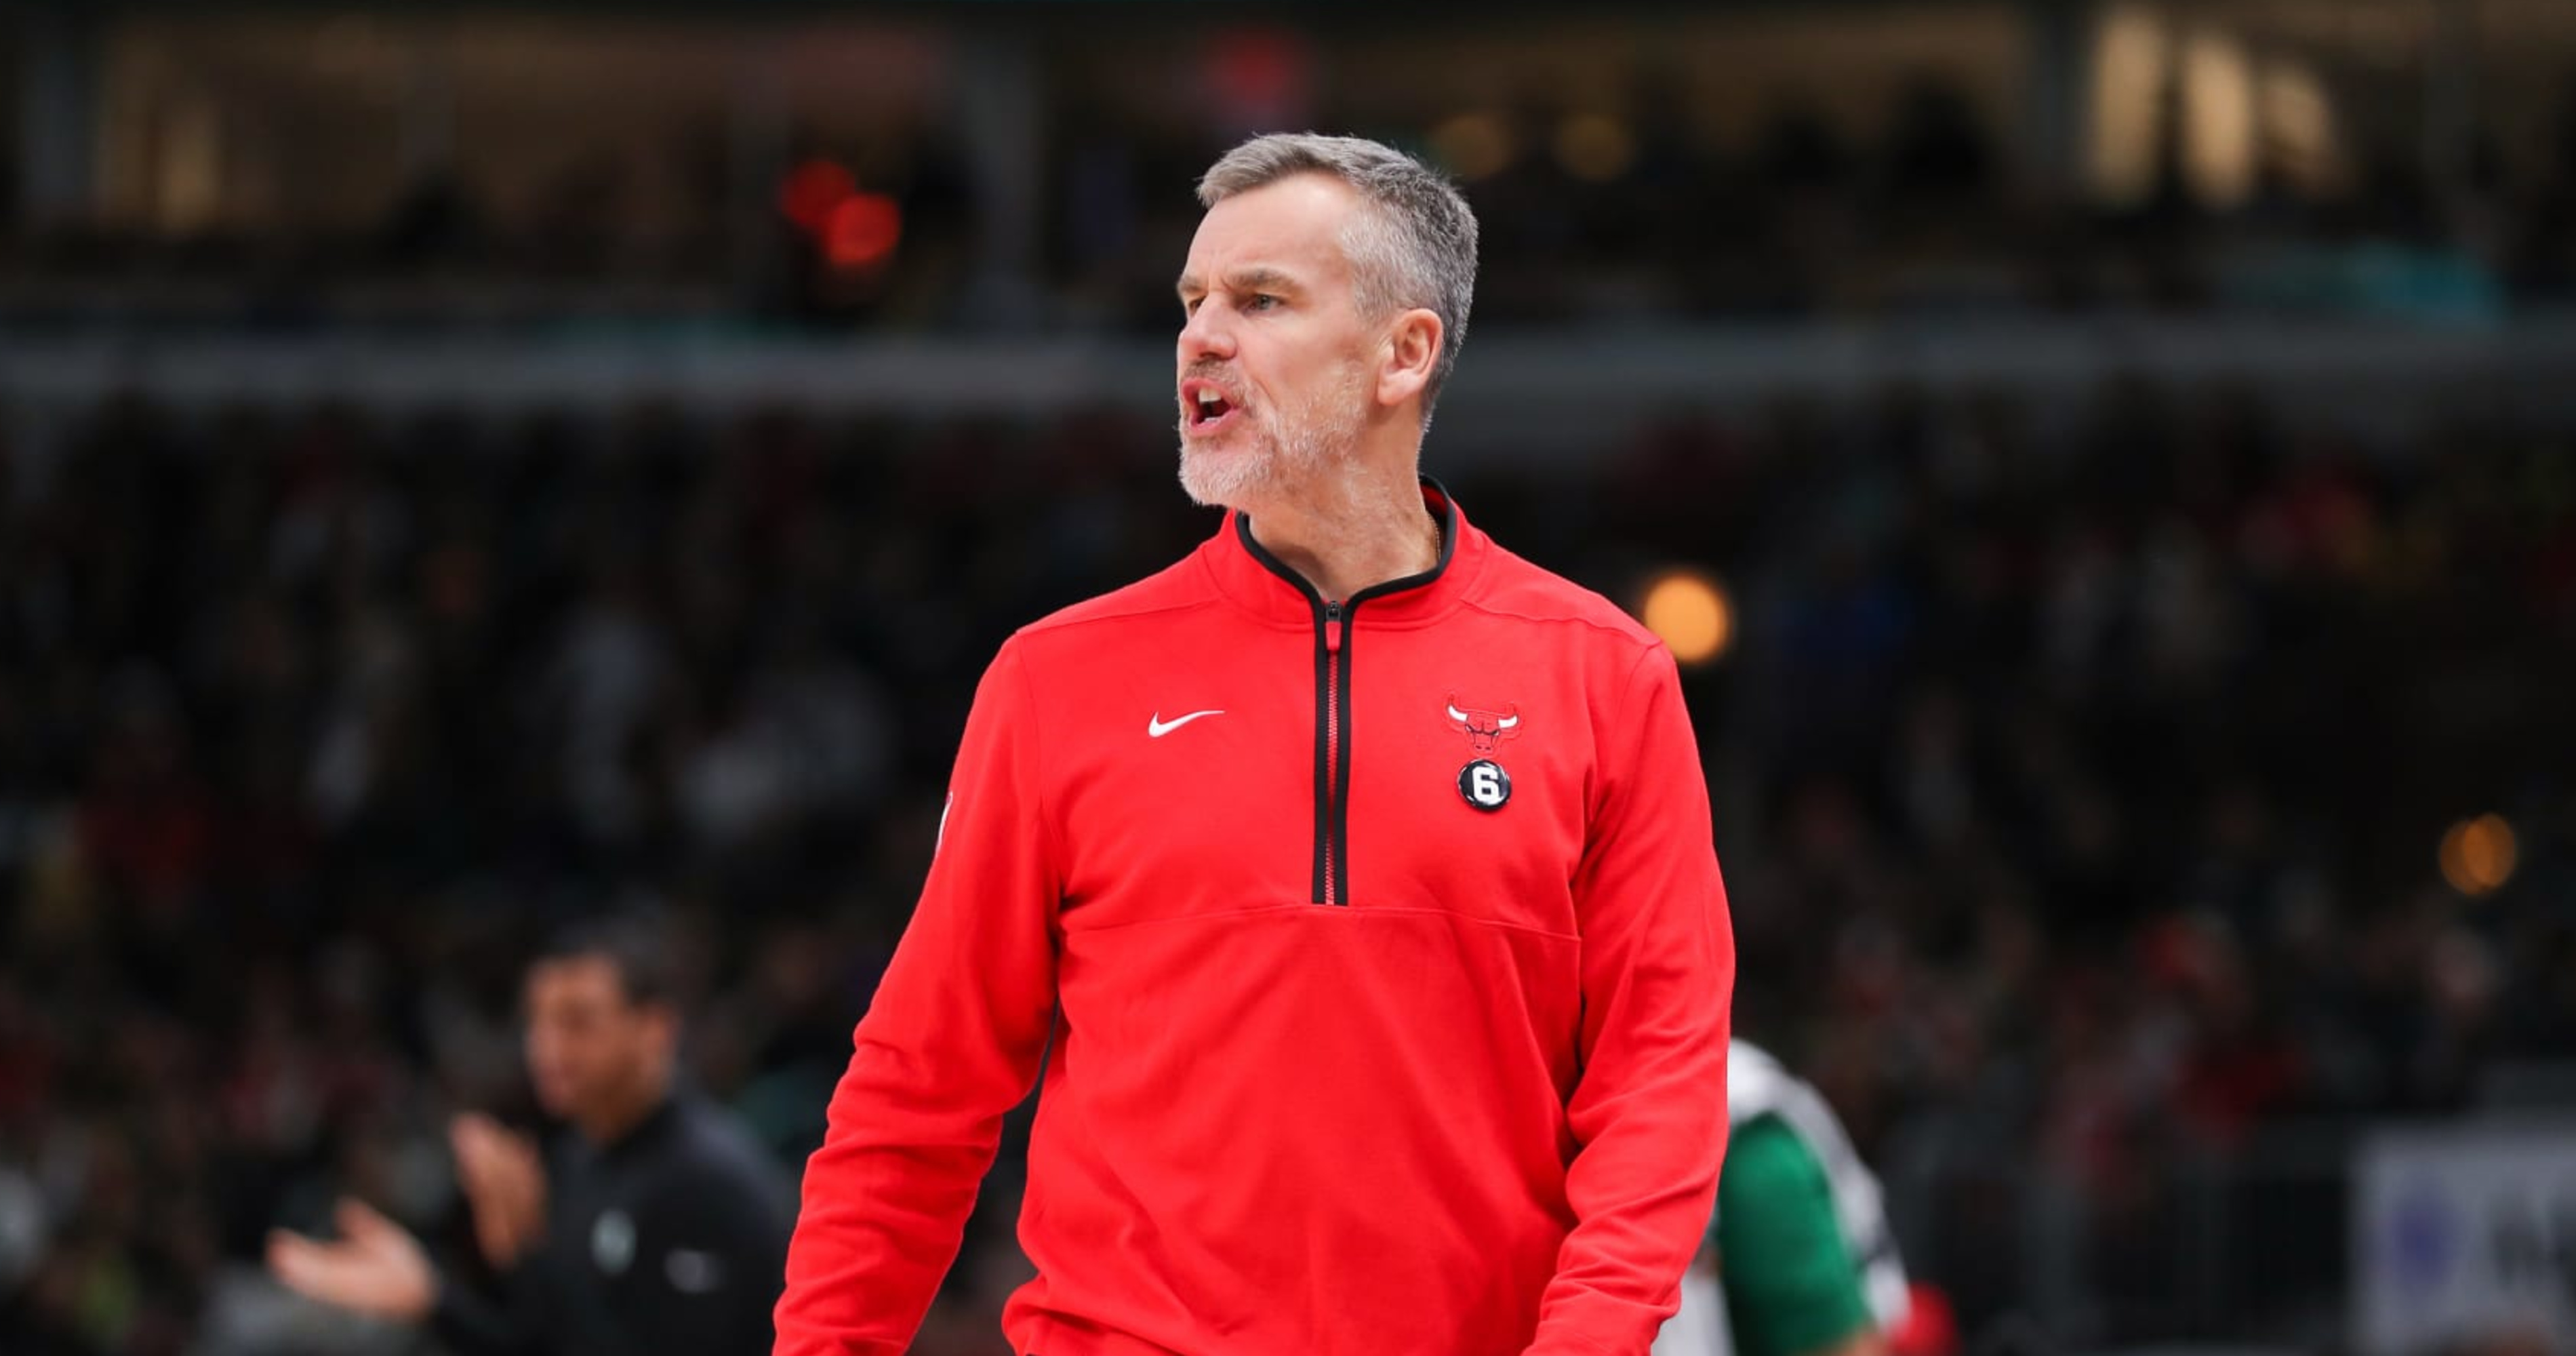 Bulls Rumors: Billy Donovan Signed Contract Extension Before 2022-23 Season